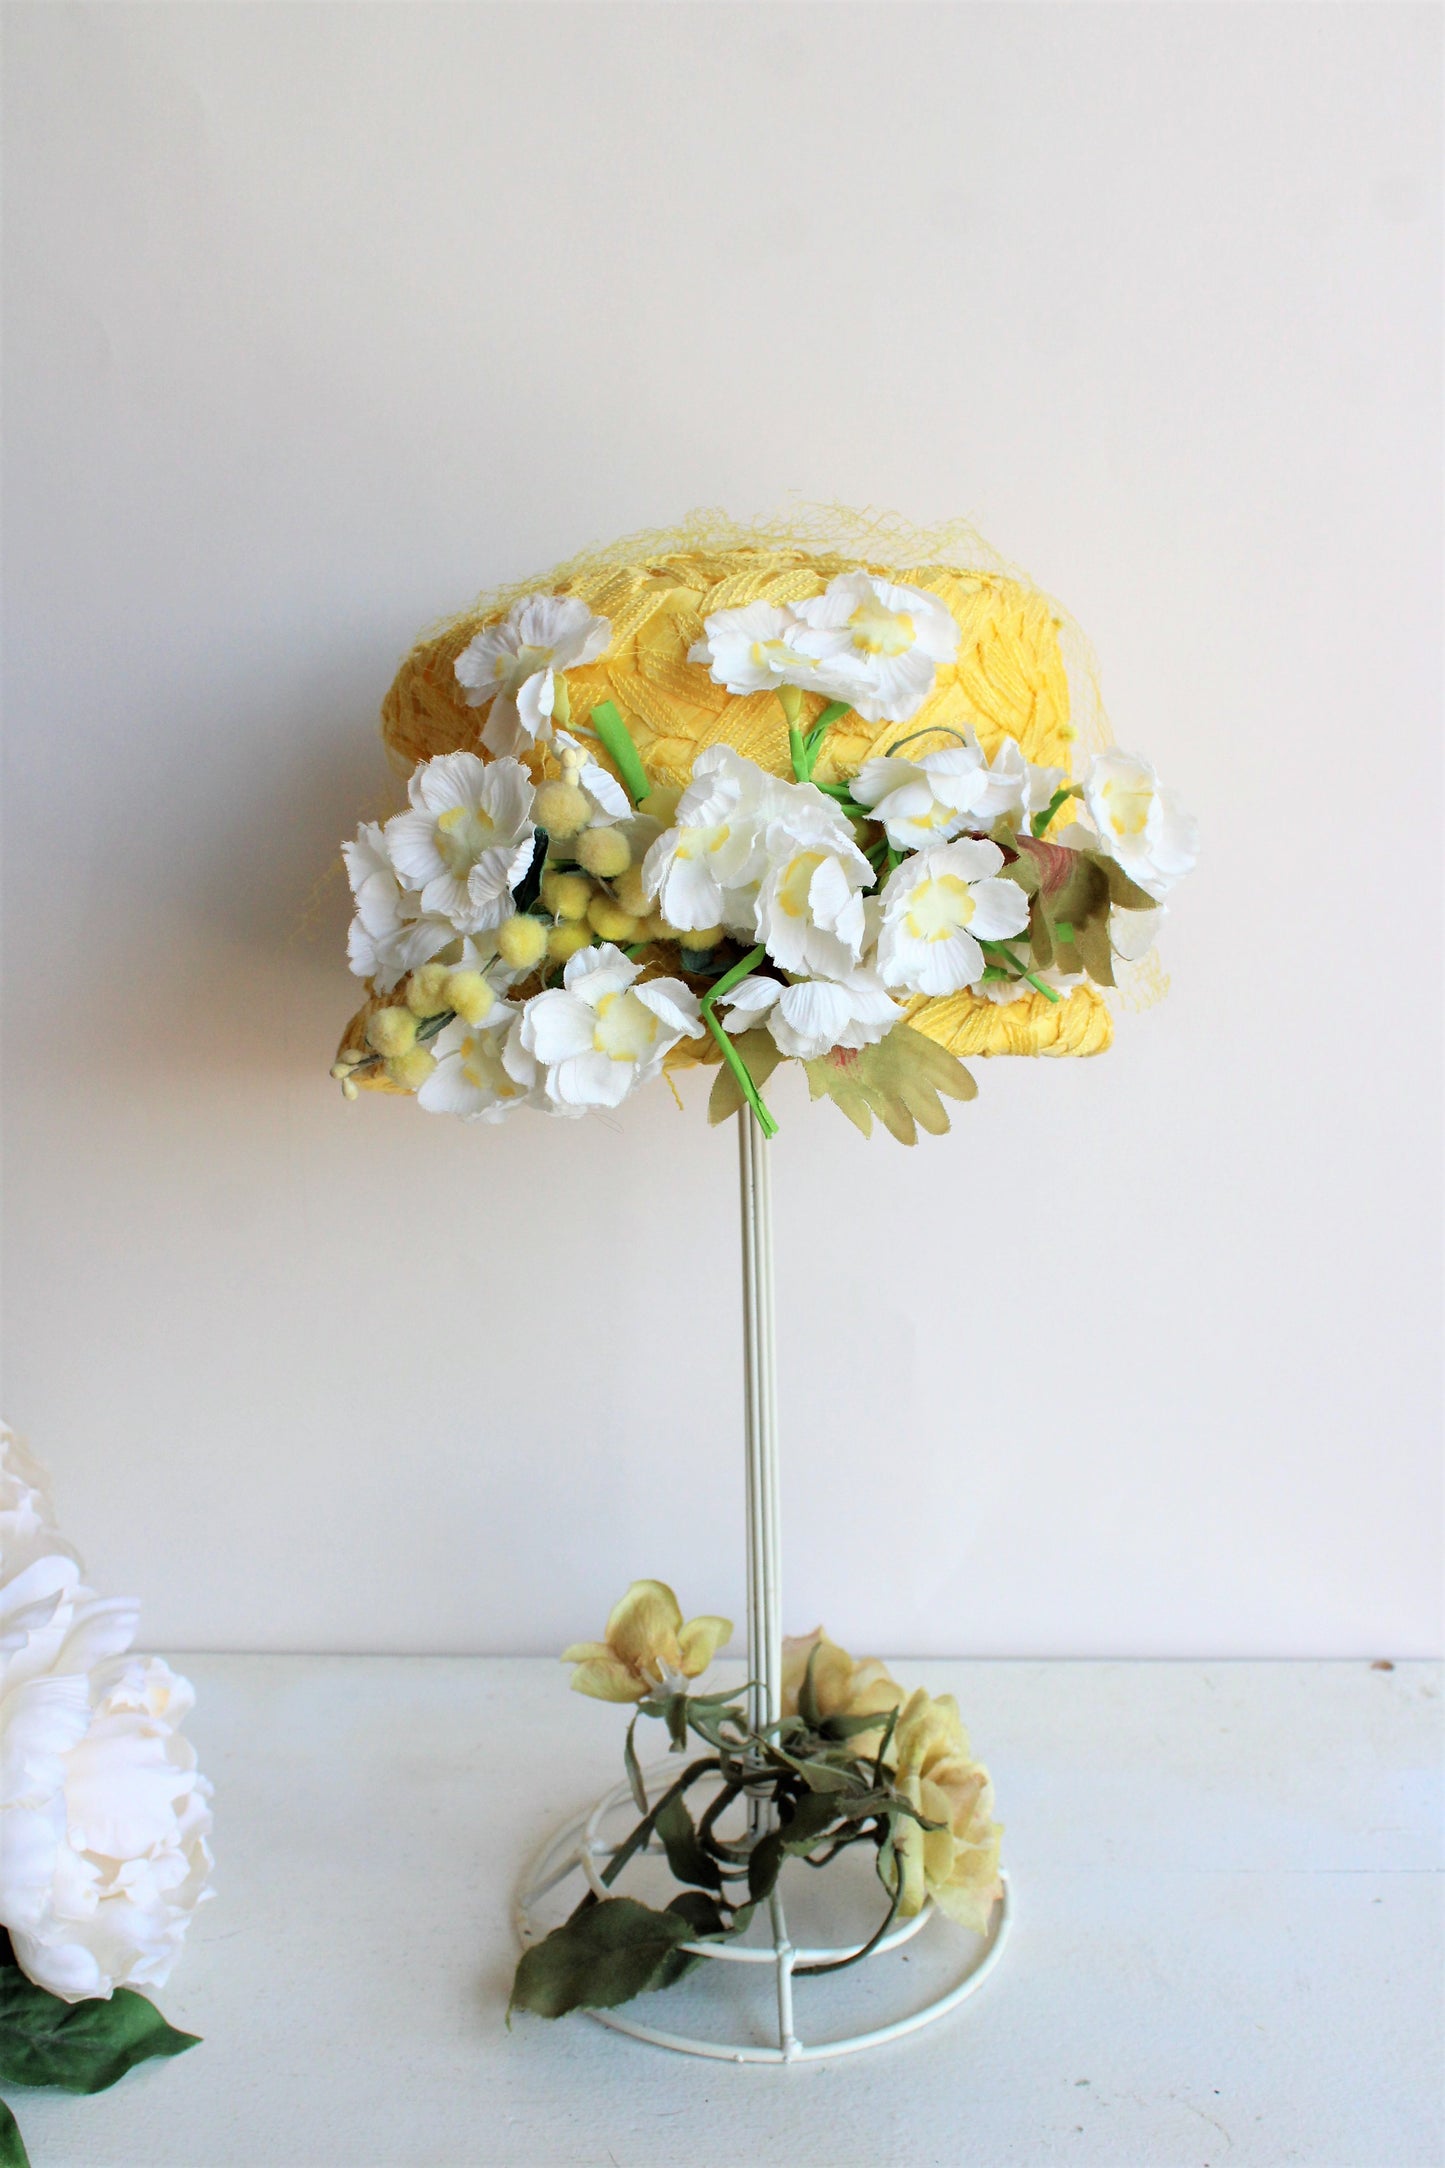 Vintage 1960s Jean Sutton Yellow and White Flower Hat